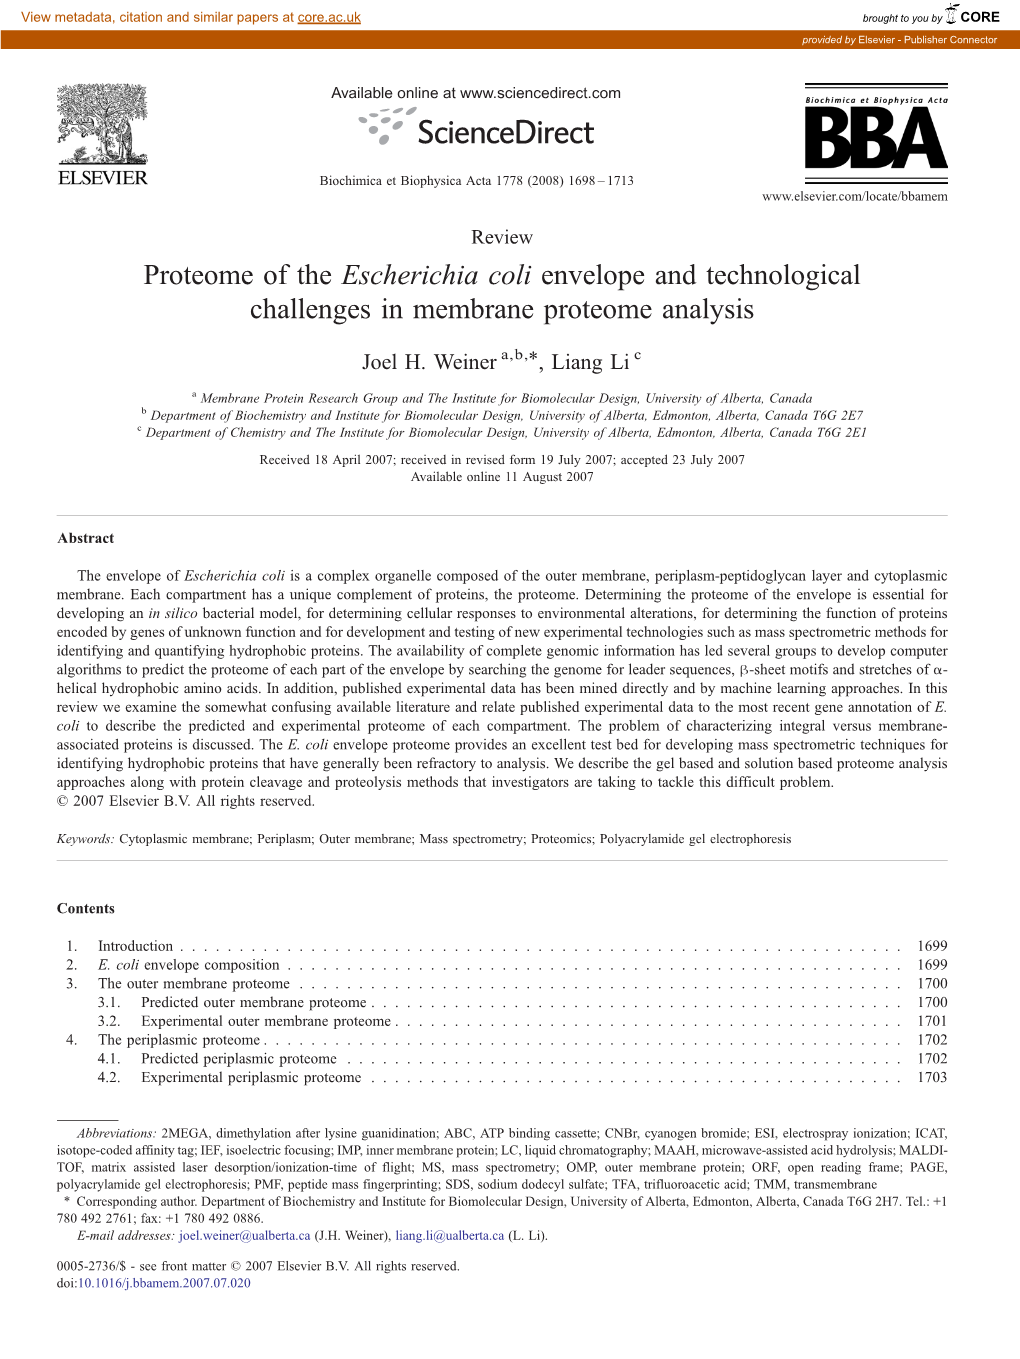 Proteome of the Escherichia Coli Envelope and Technological Challenges in Membrane Proteome Analysis ⁎ Joel H